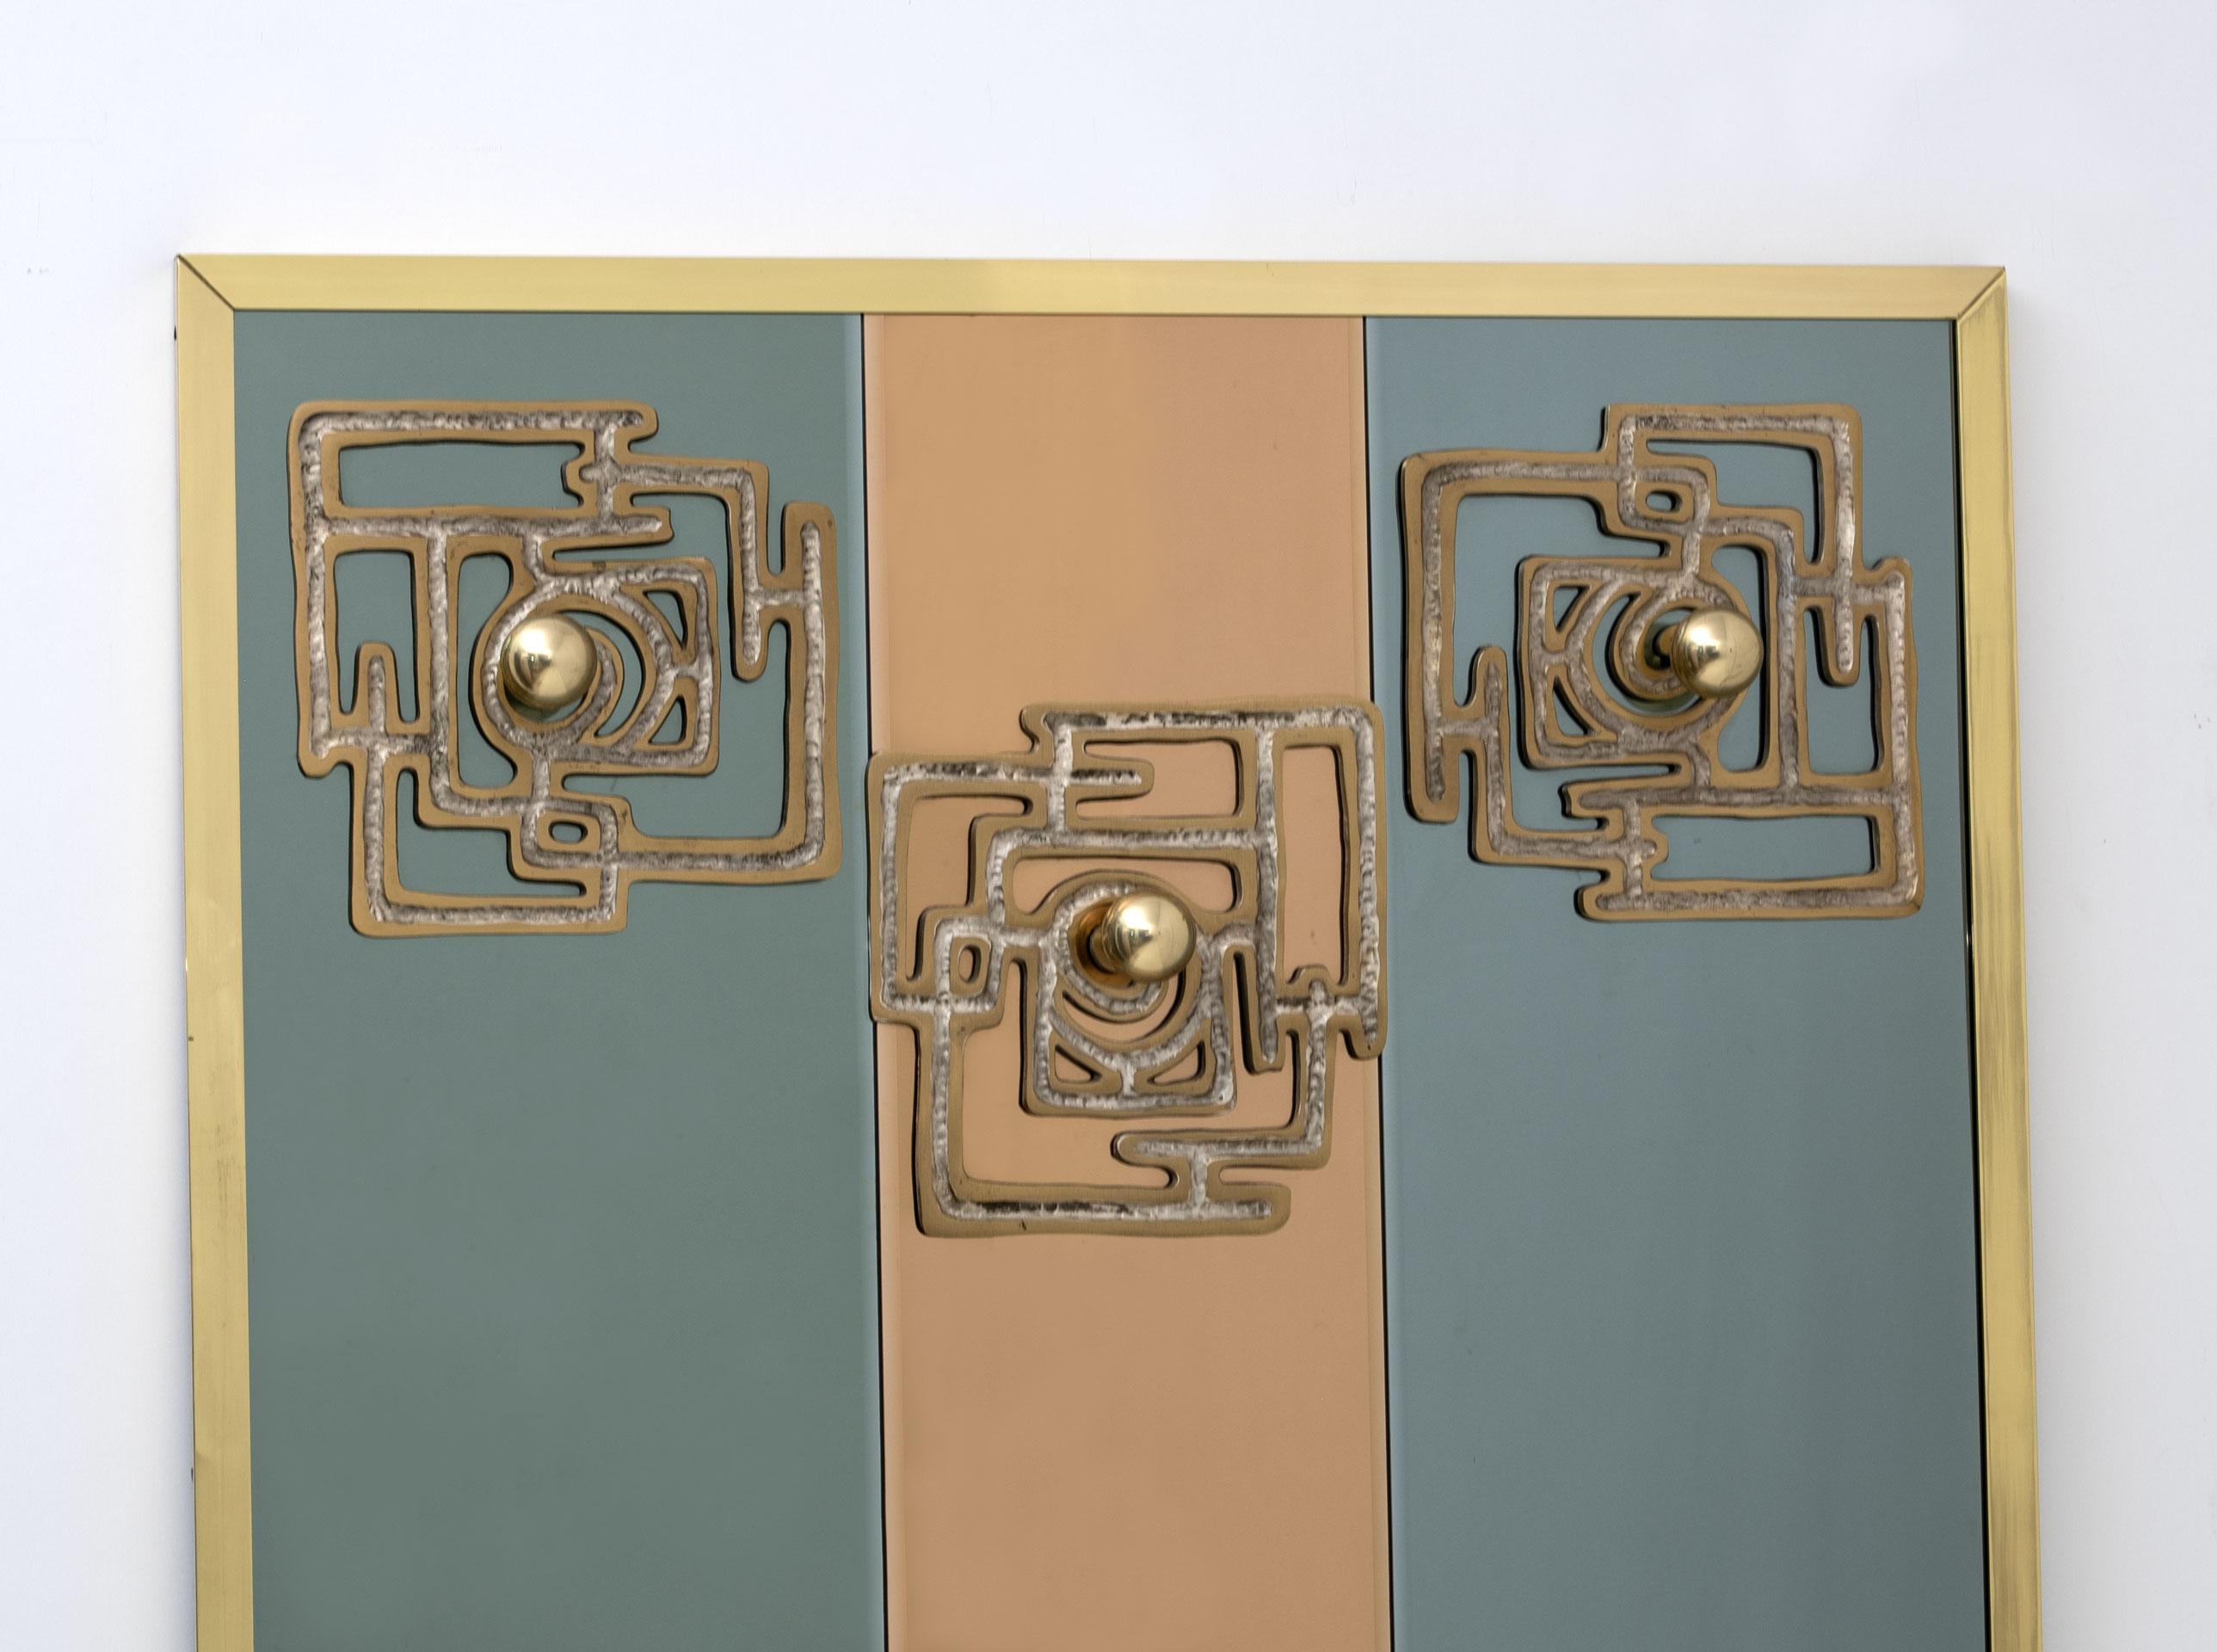 Designed by Luciano Frigerio this delightful and unique mirrored coat hanger, divided into three mirror parts in rose gold and gray colored with 3 sculptural bronze plaques applied with brass spheres.